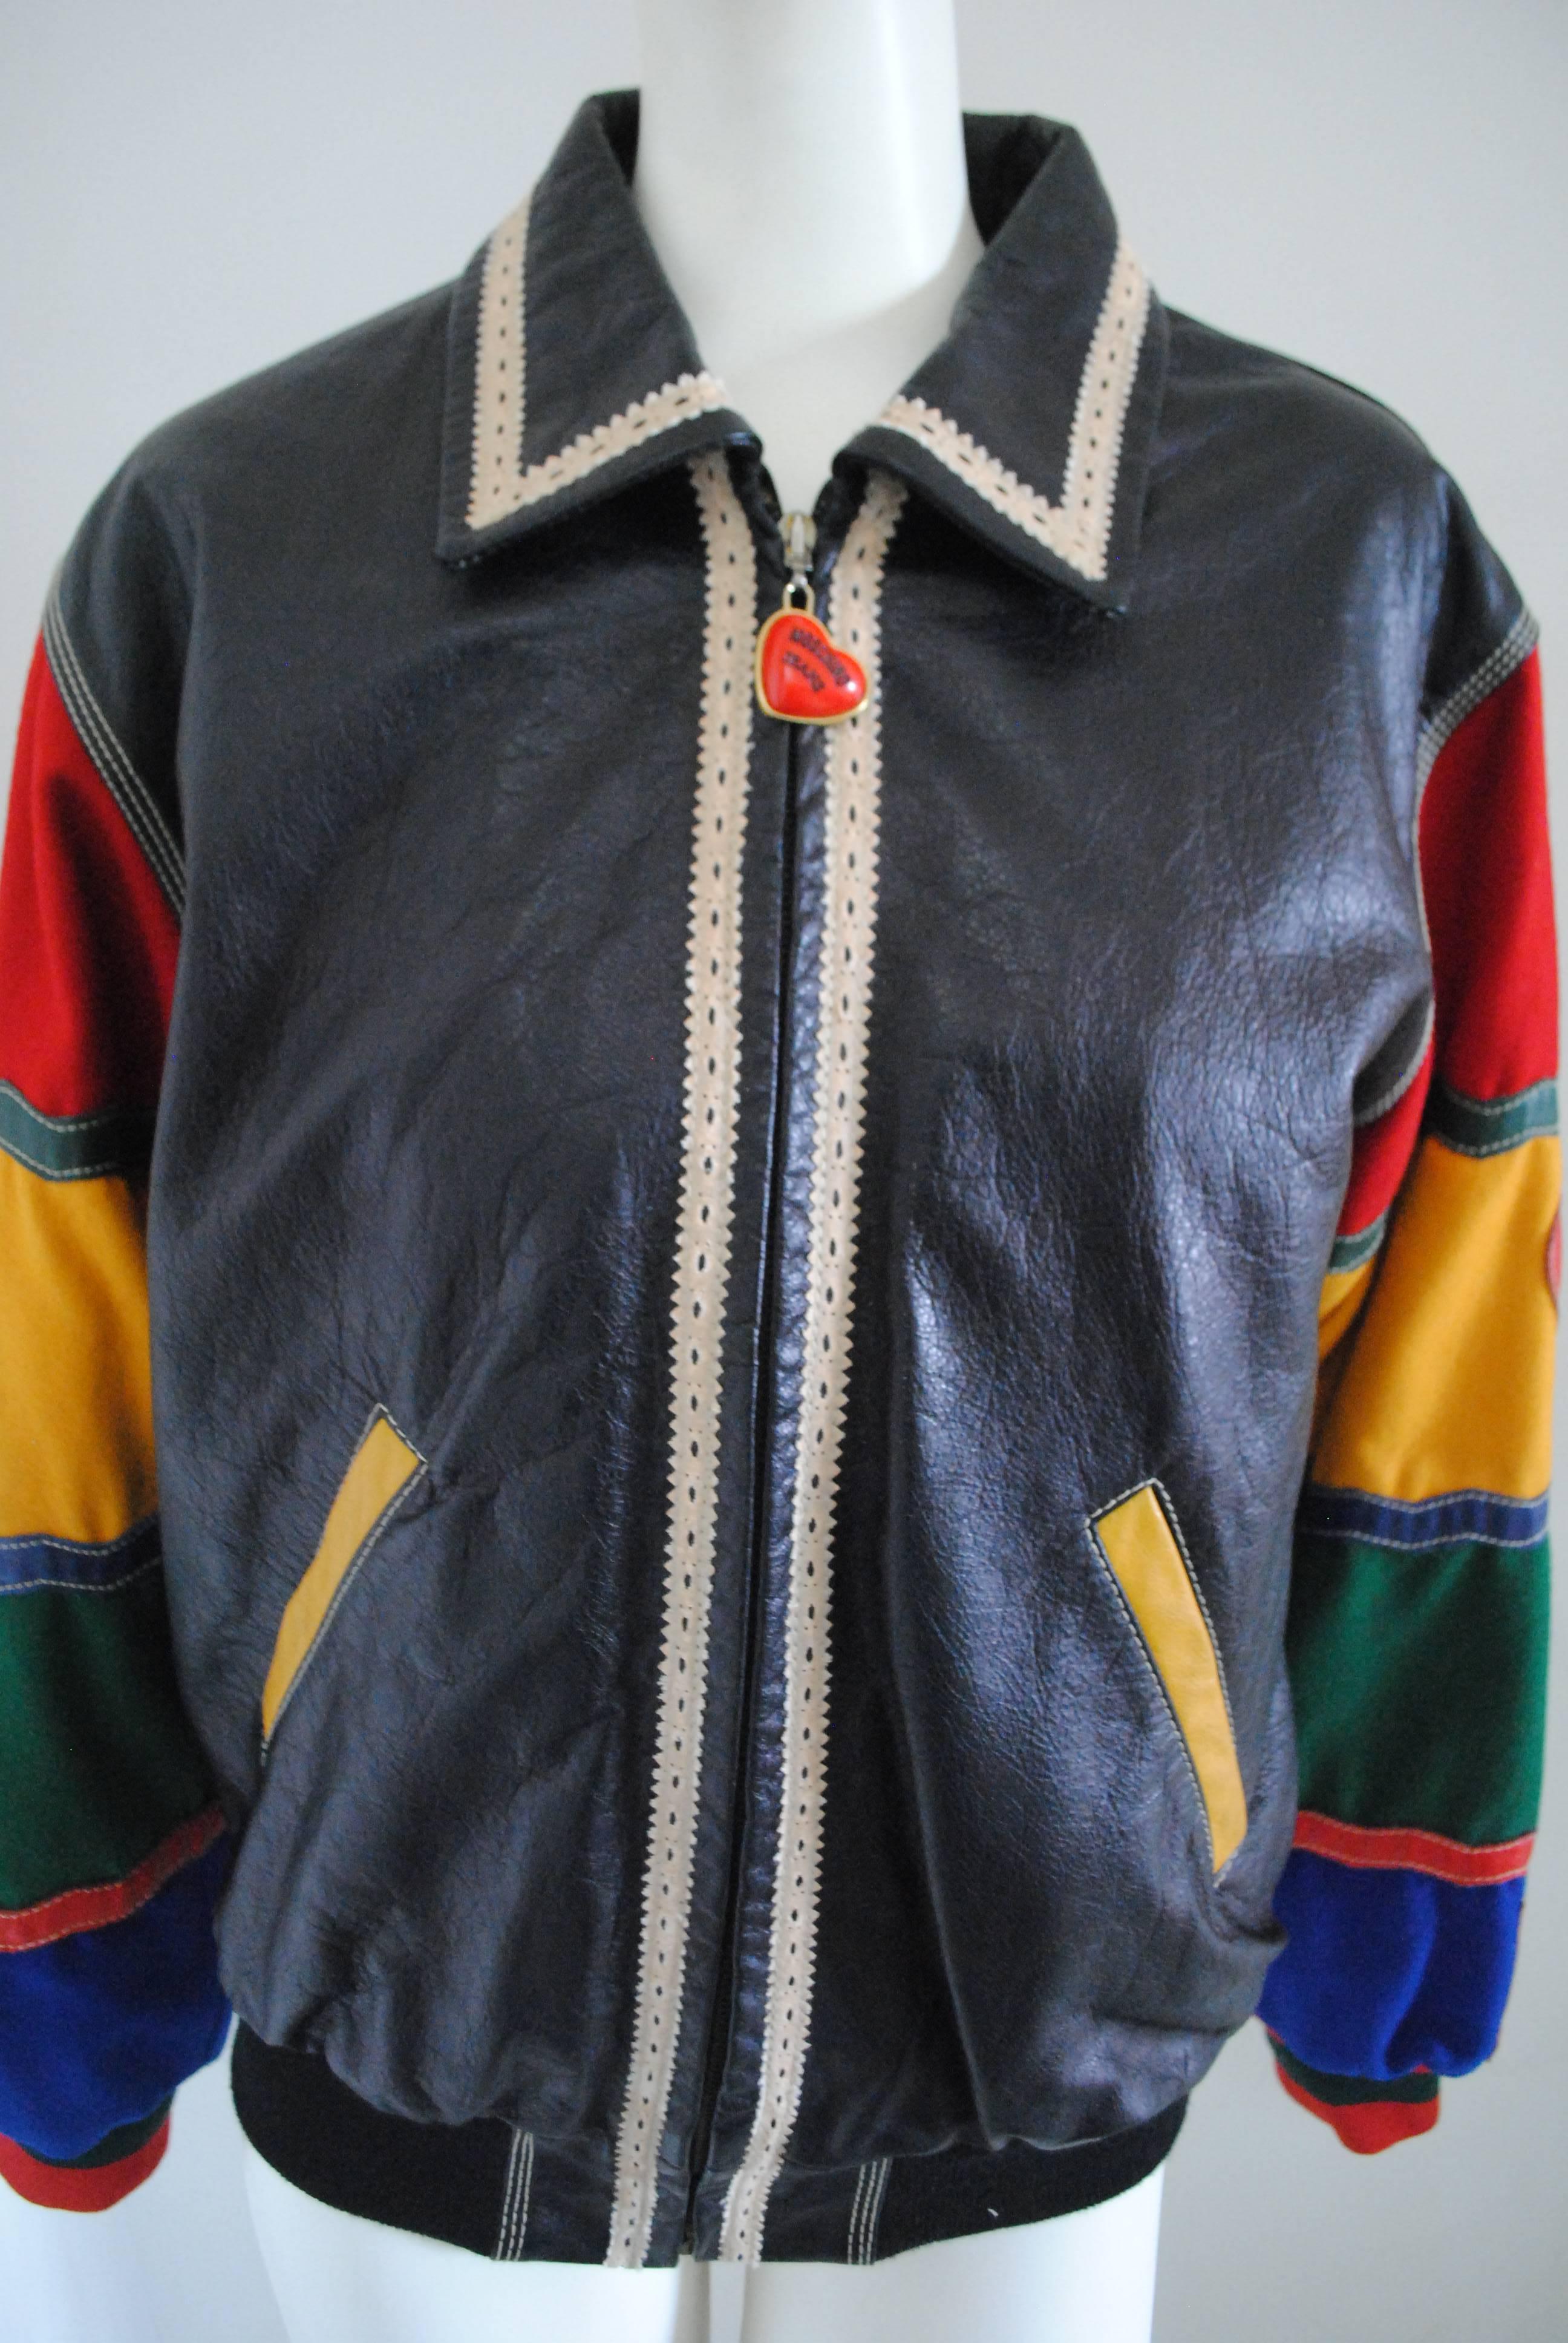 1980s Rare Moschino Jeans Peace & Love Vintage Leather Wool Jacket

Unique and hard to find vintage Moschino Jeans Jacket.

Both shoulder are wool with leather inserts. On the right side Peace on the left side Love and M (Moschino)

All sorrounded